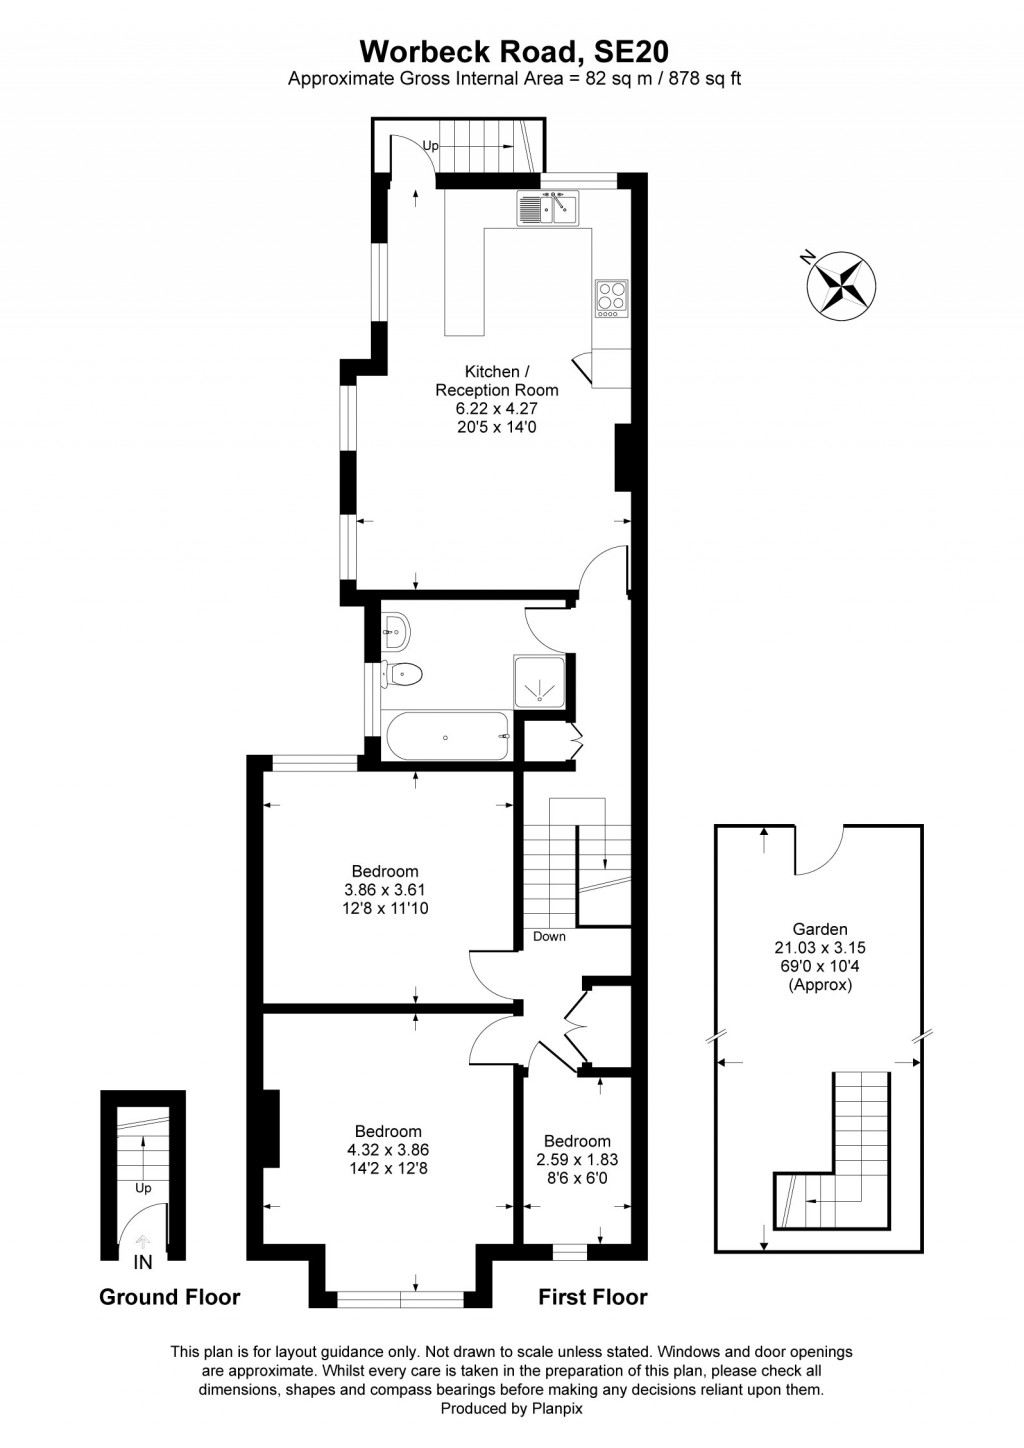 Floorplans For Worbeck Road, London